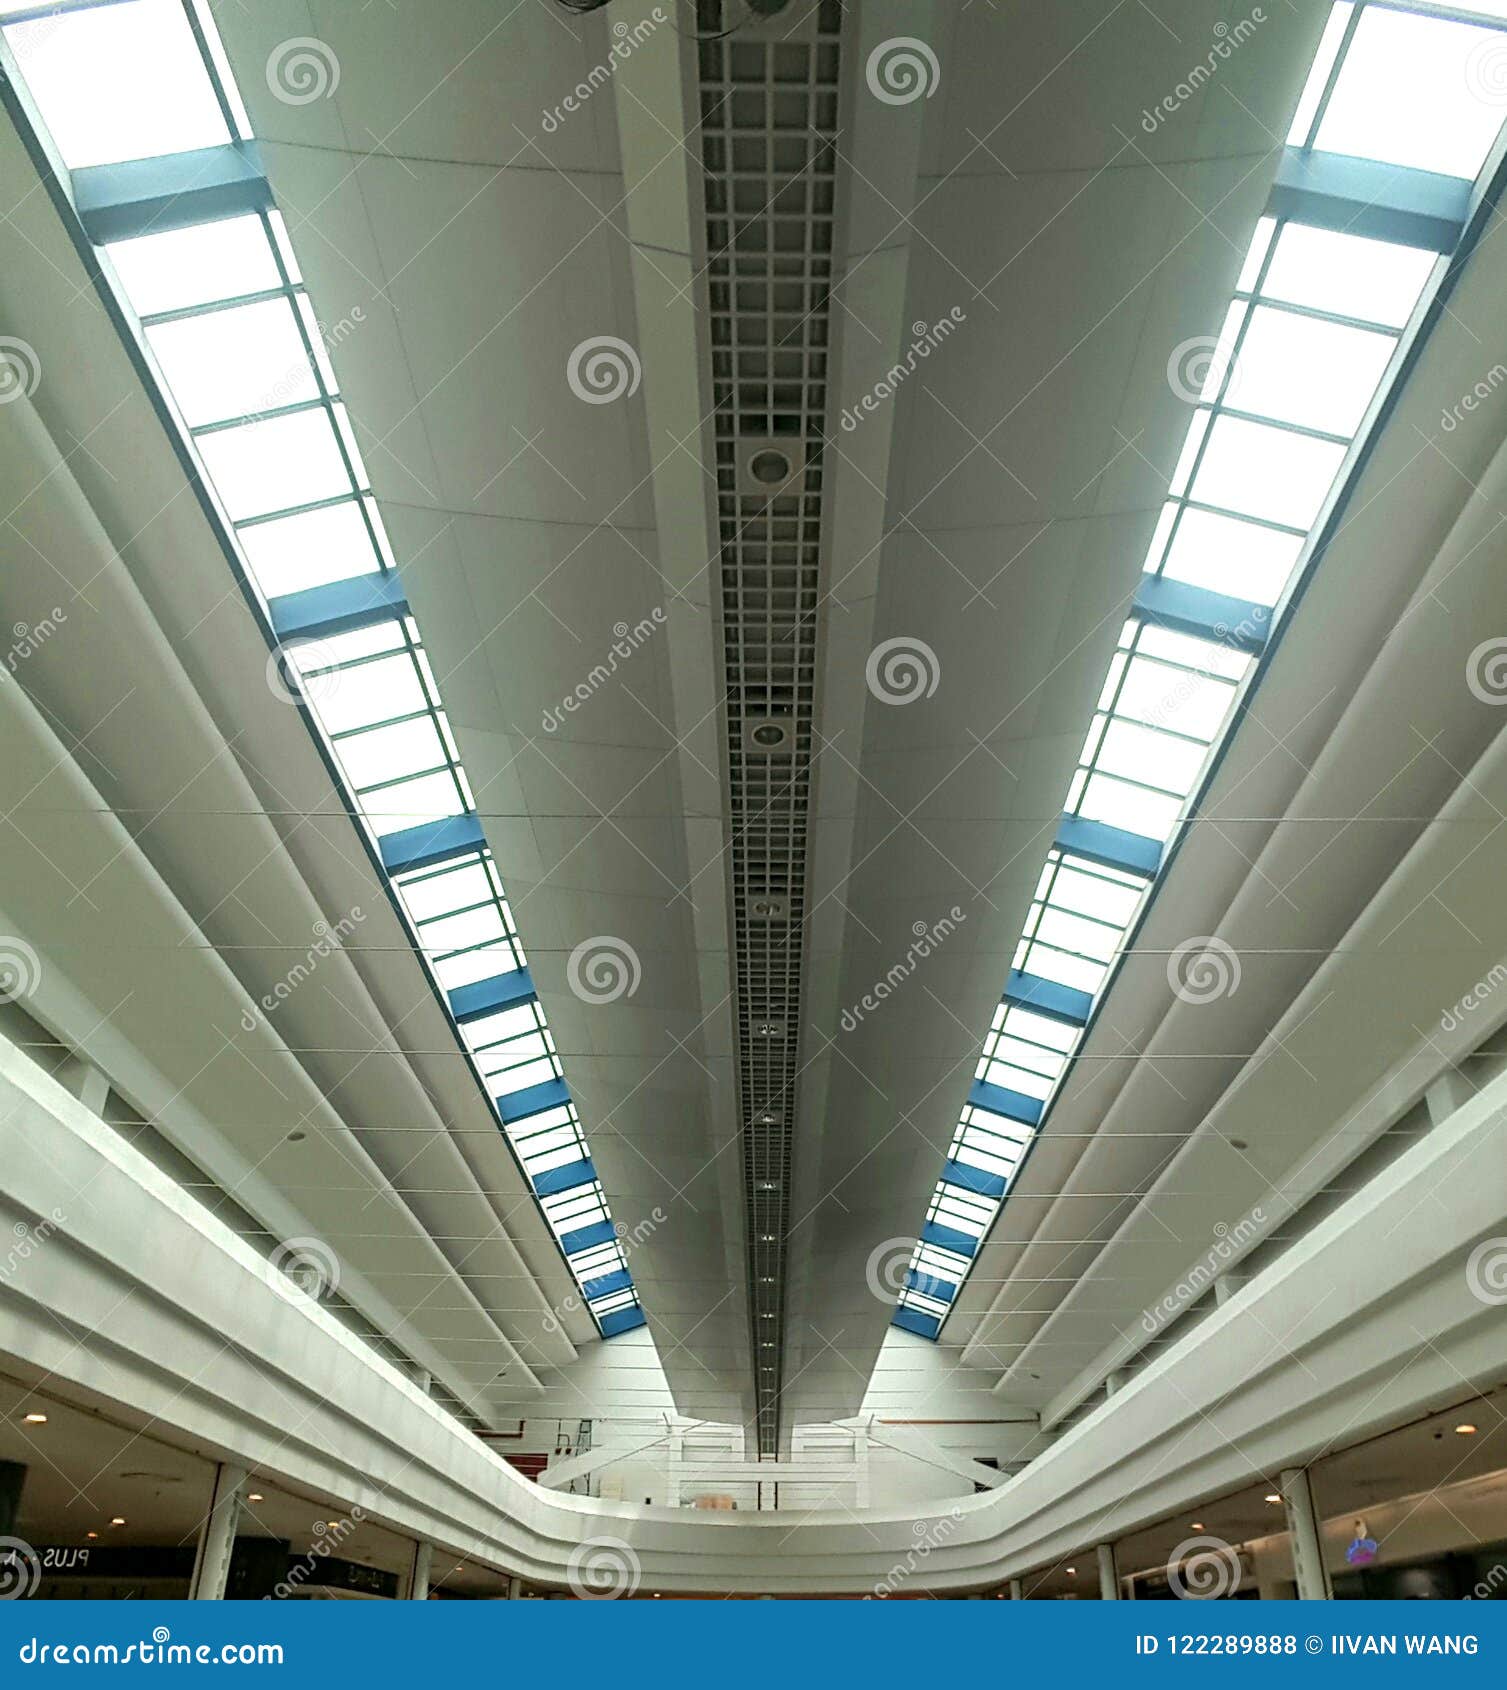 Futuristic Ceiling Design Stock Photo Image Of Which 122289888